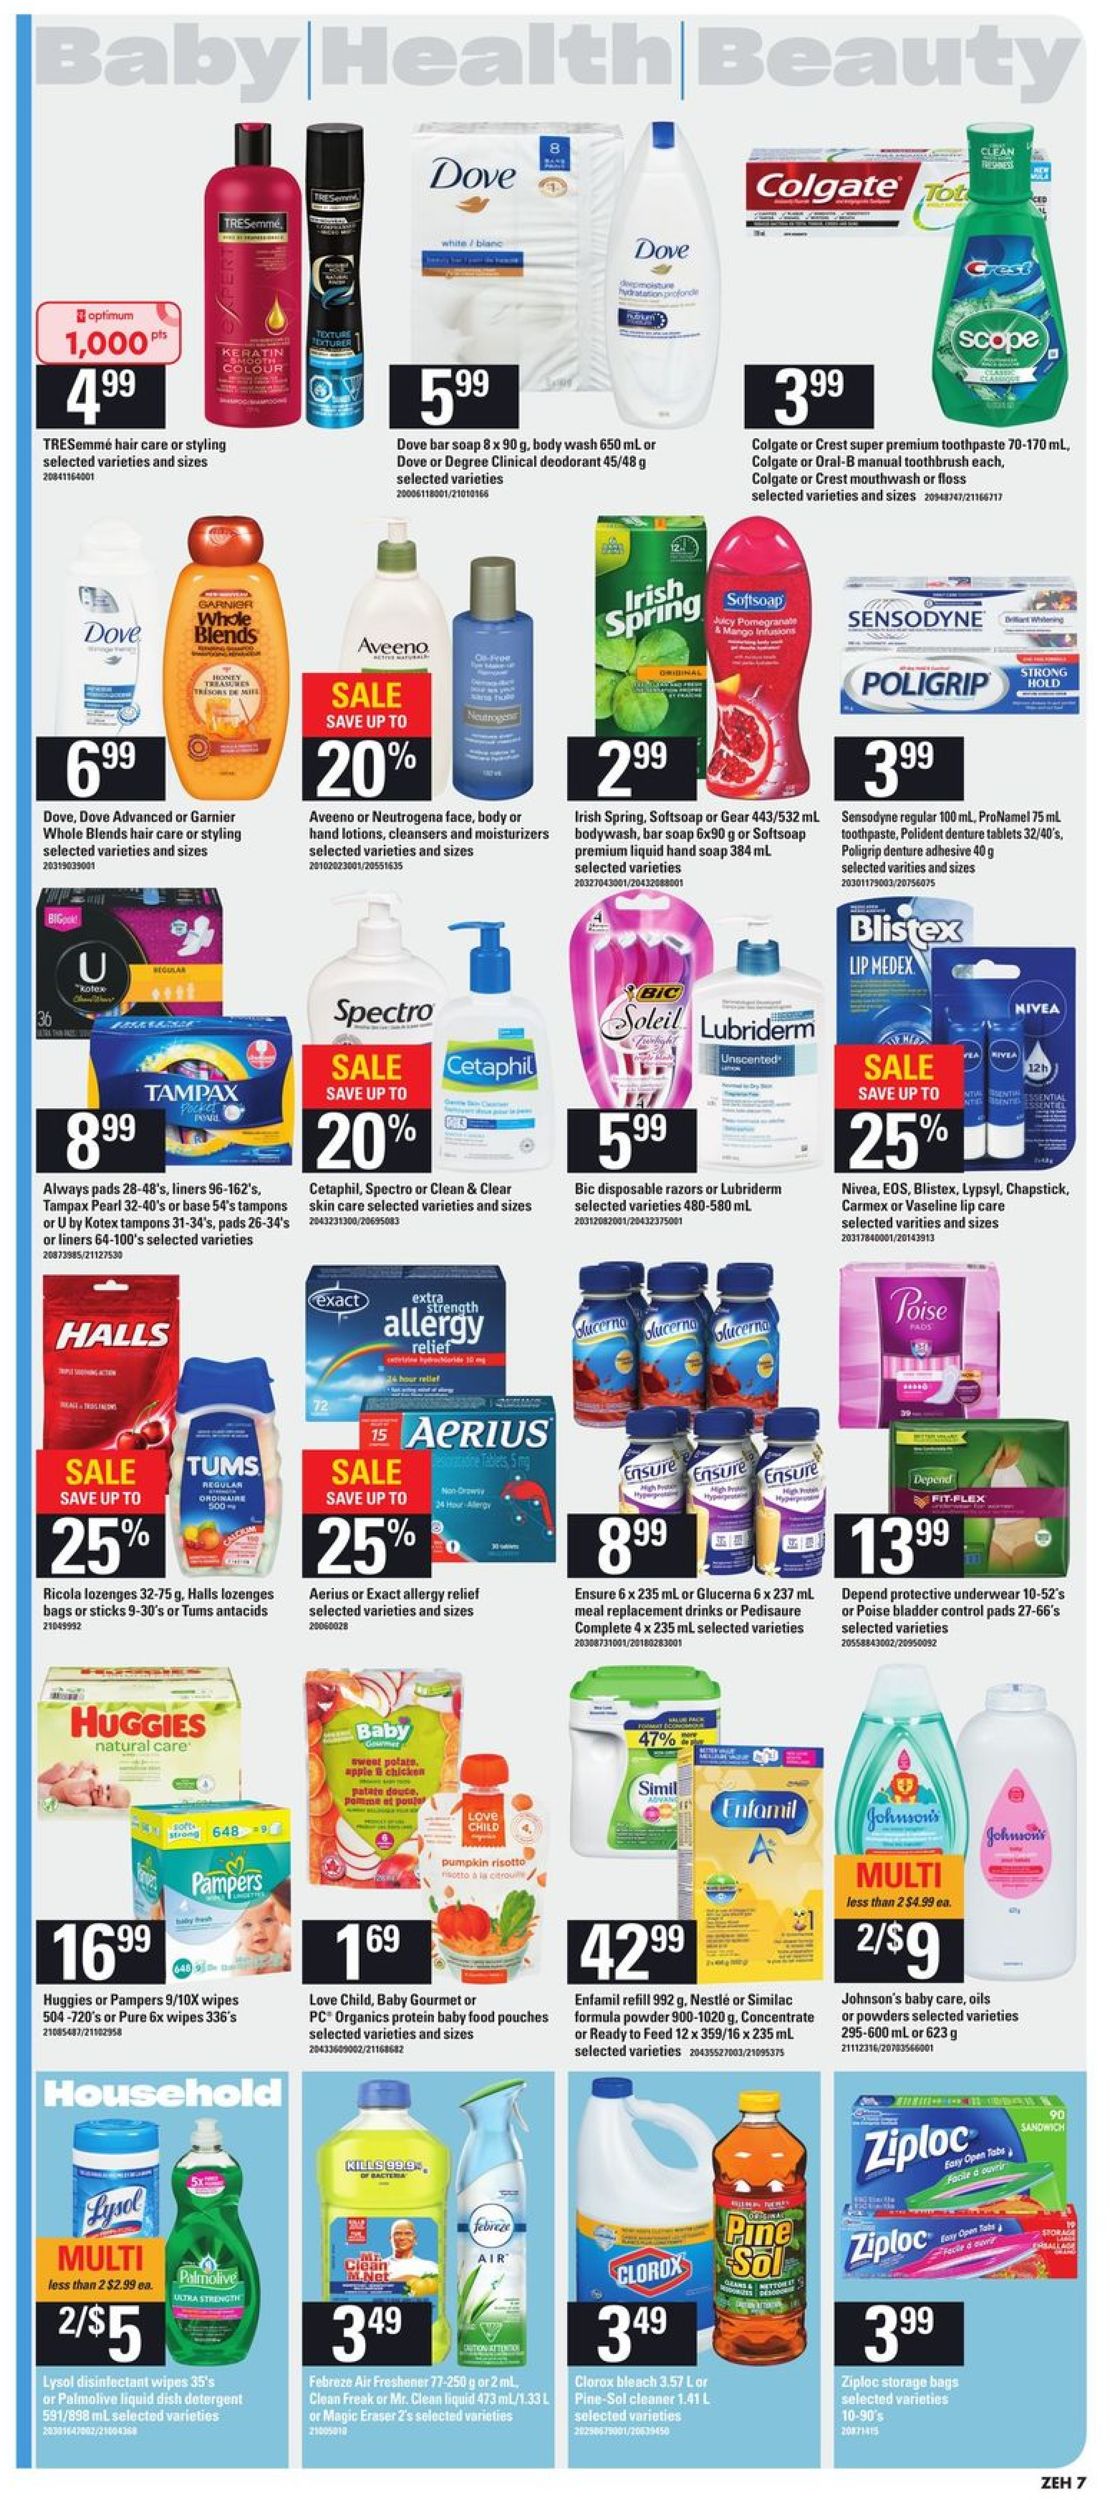 Zehrs Flyer from 06/20/2019